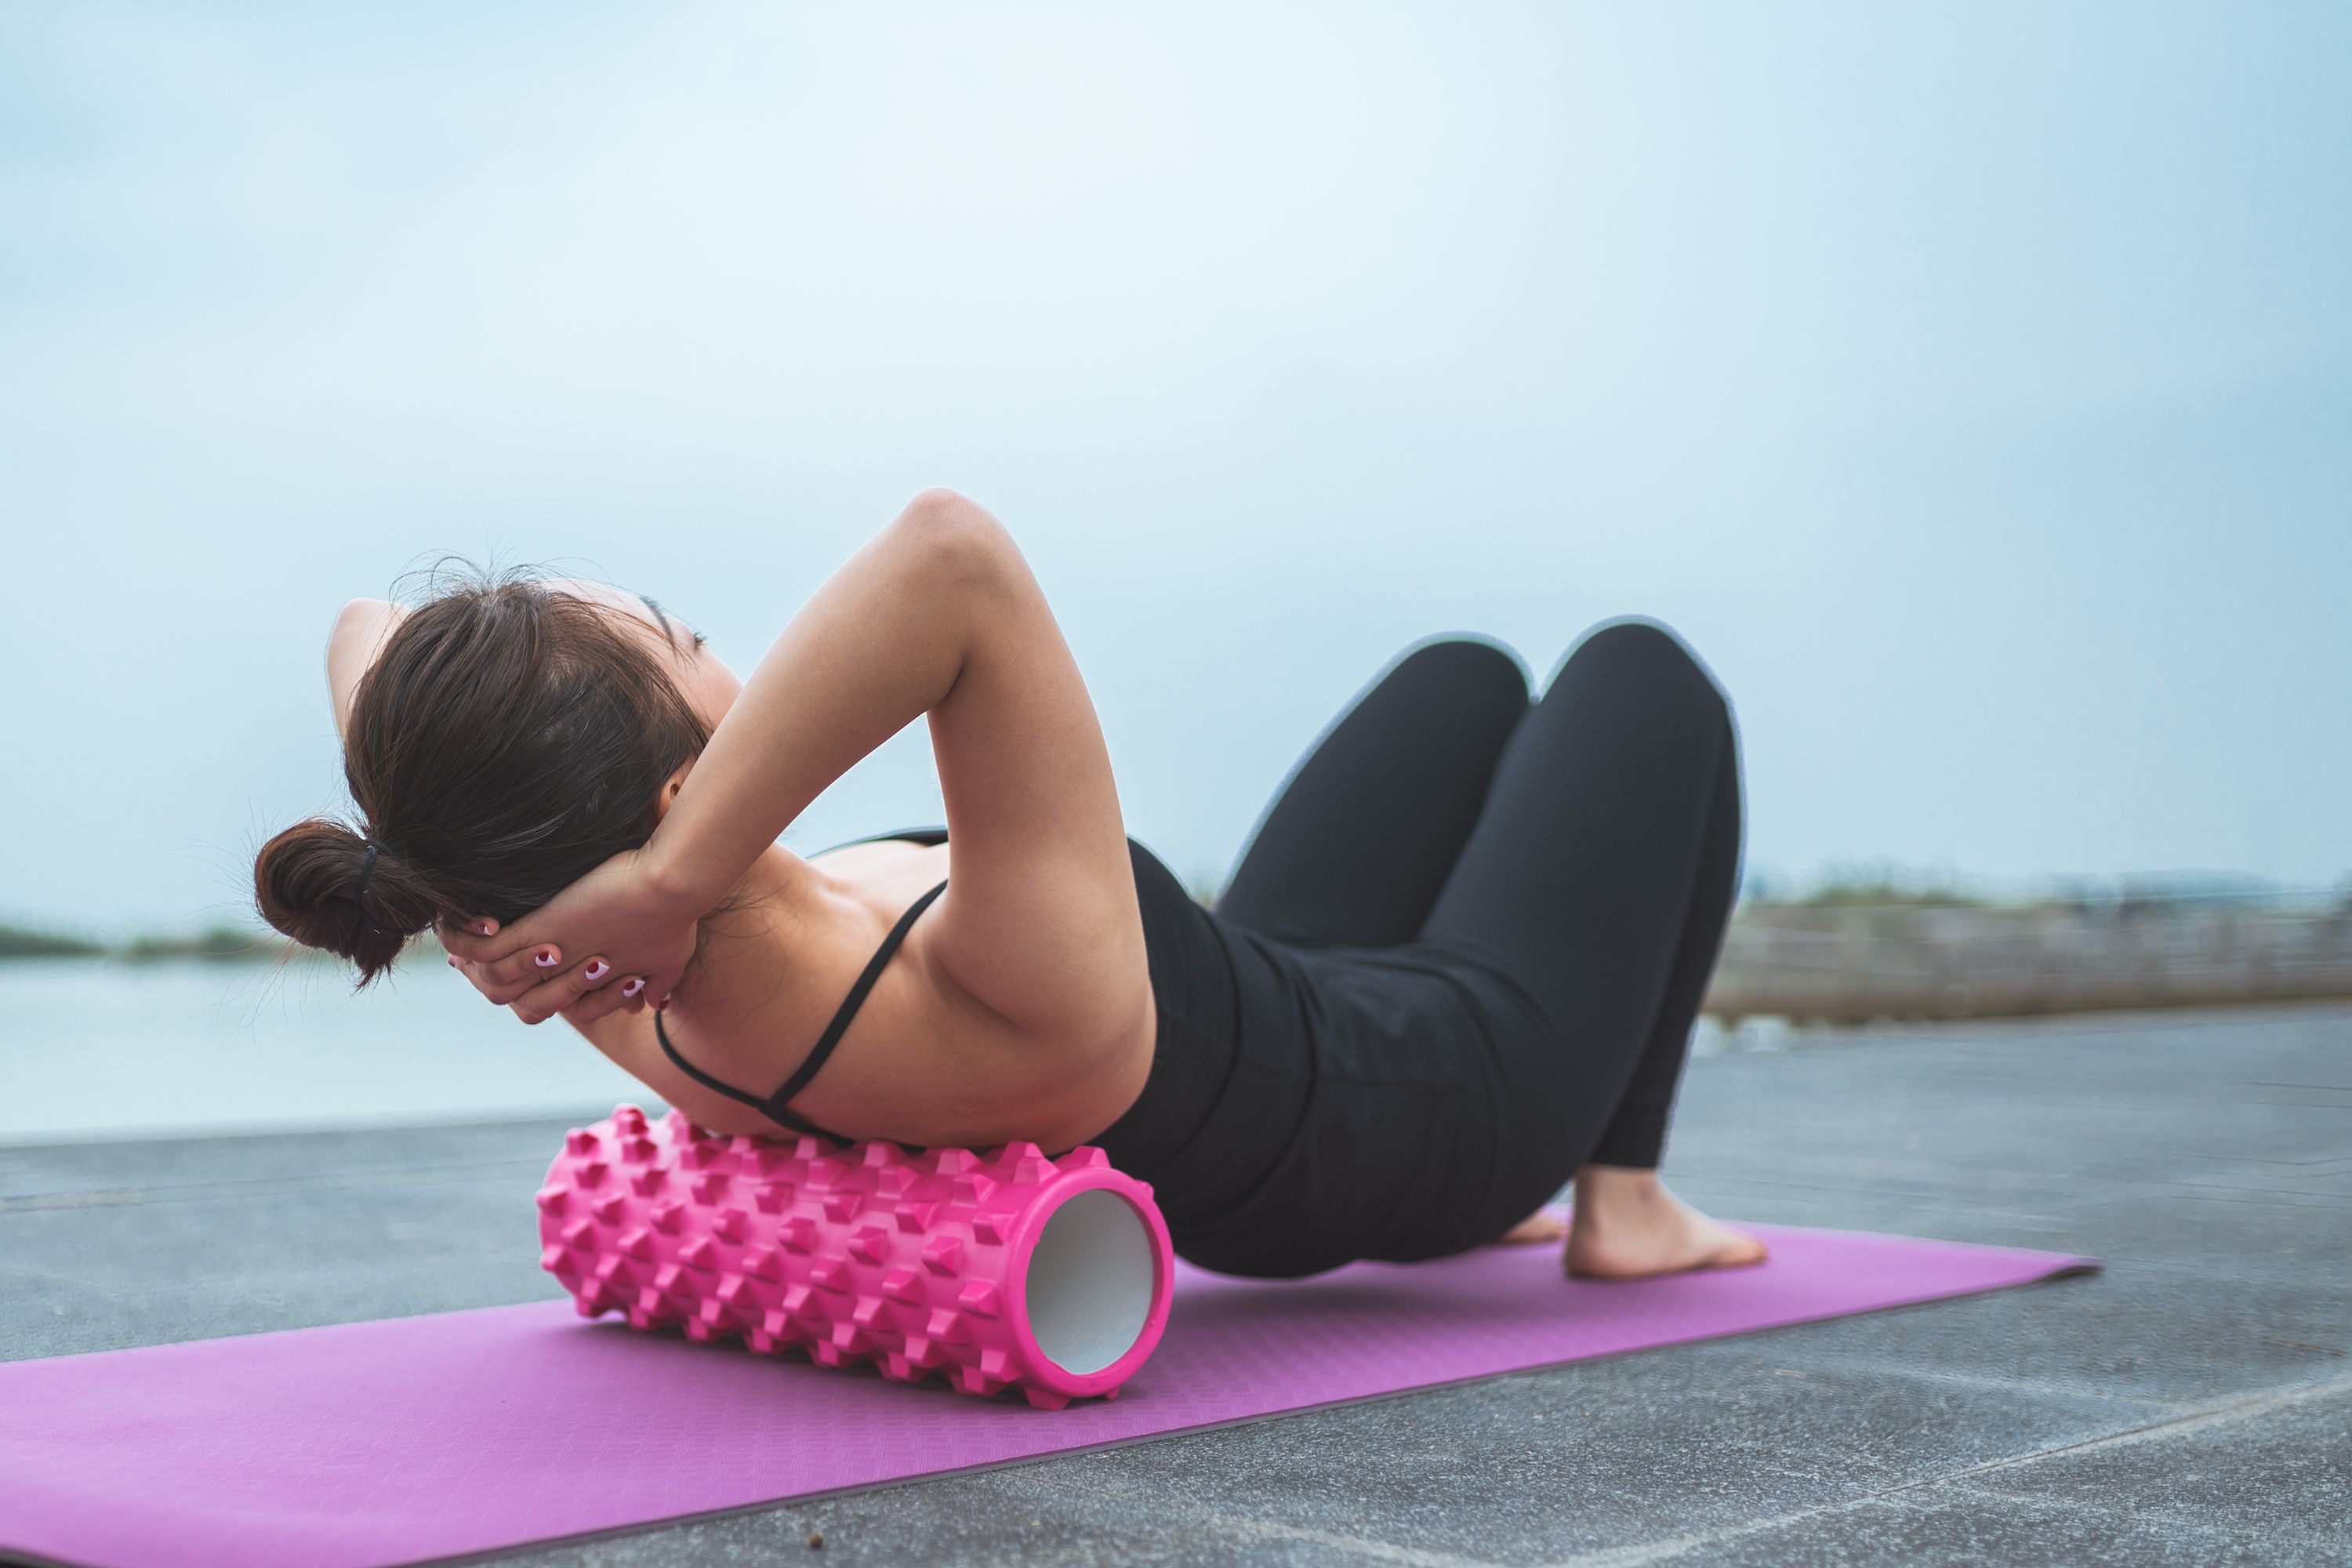 9 Foam Roller Exercises you Should Be Doing More Regularly